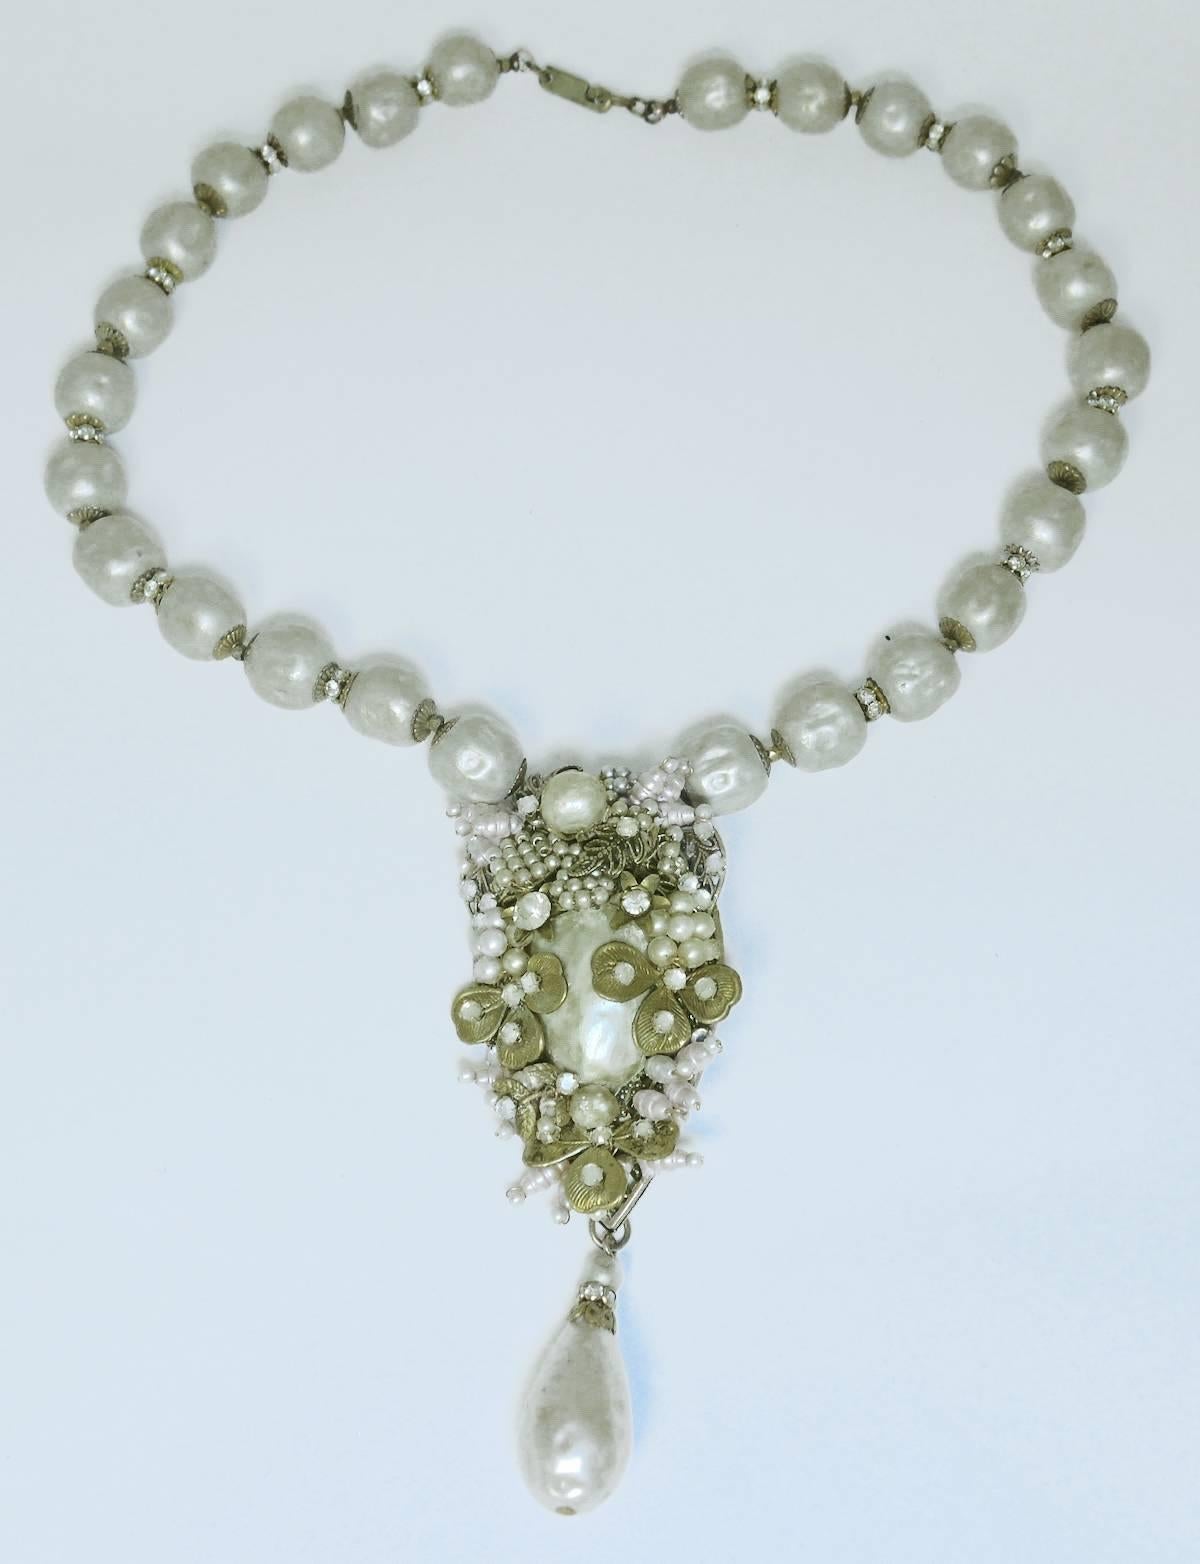 This all original Miriam Haskell necklace is created with large sized cream color faux pearls. Each pearl is spaced with rhondell accents. The teardrop centerpiece is designed with a large faux pearl centerpiece with golden leaves, seed pearls and